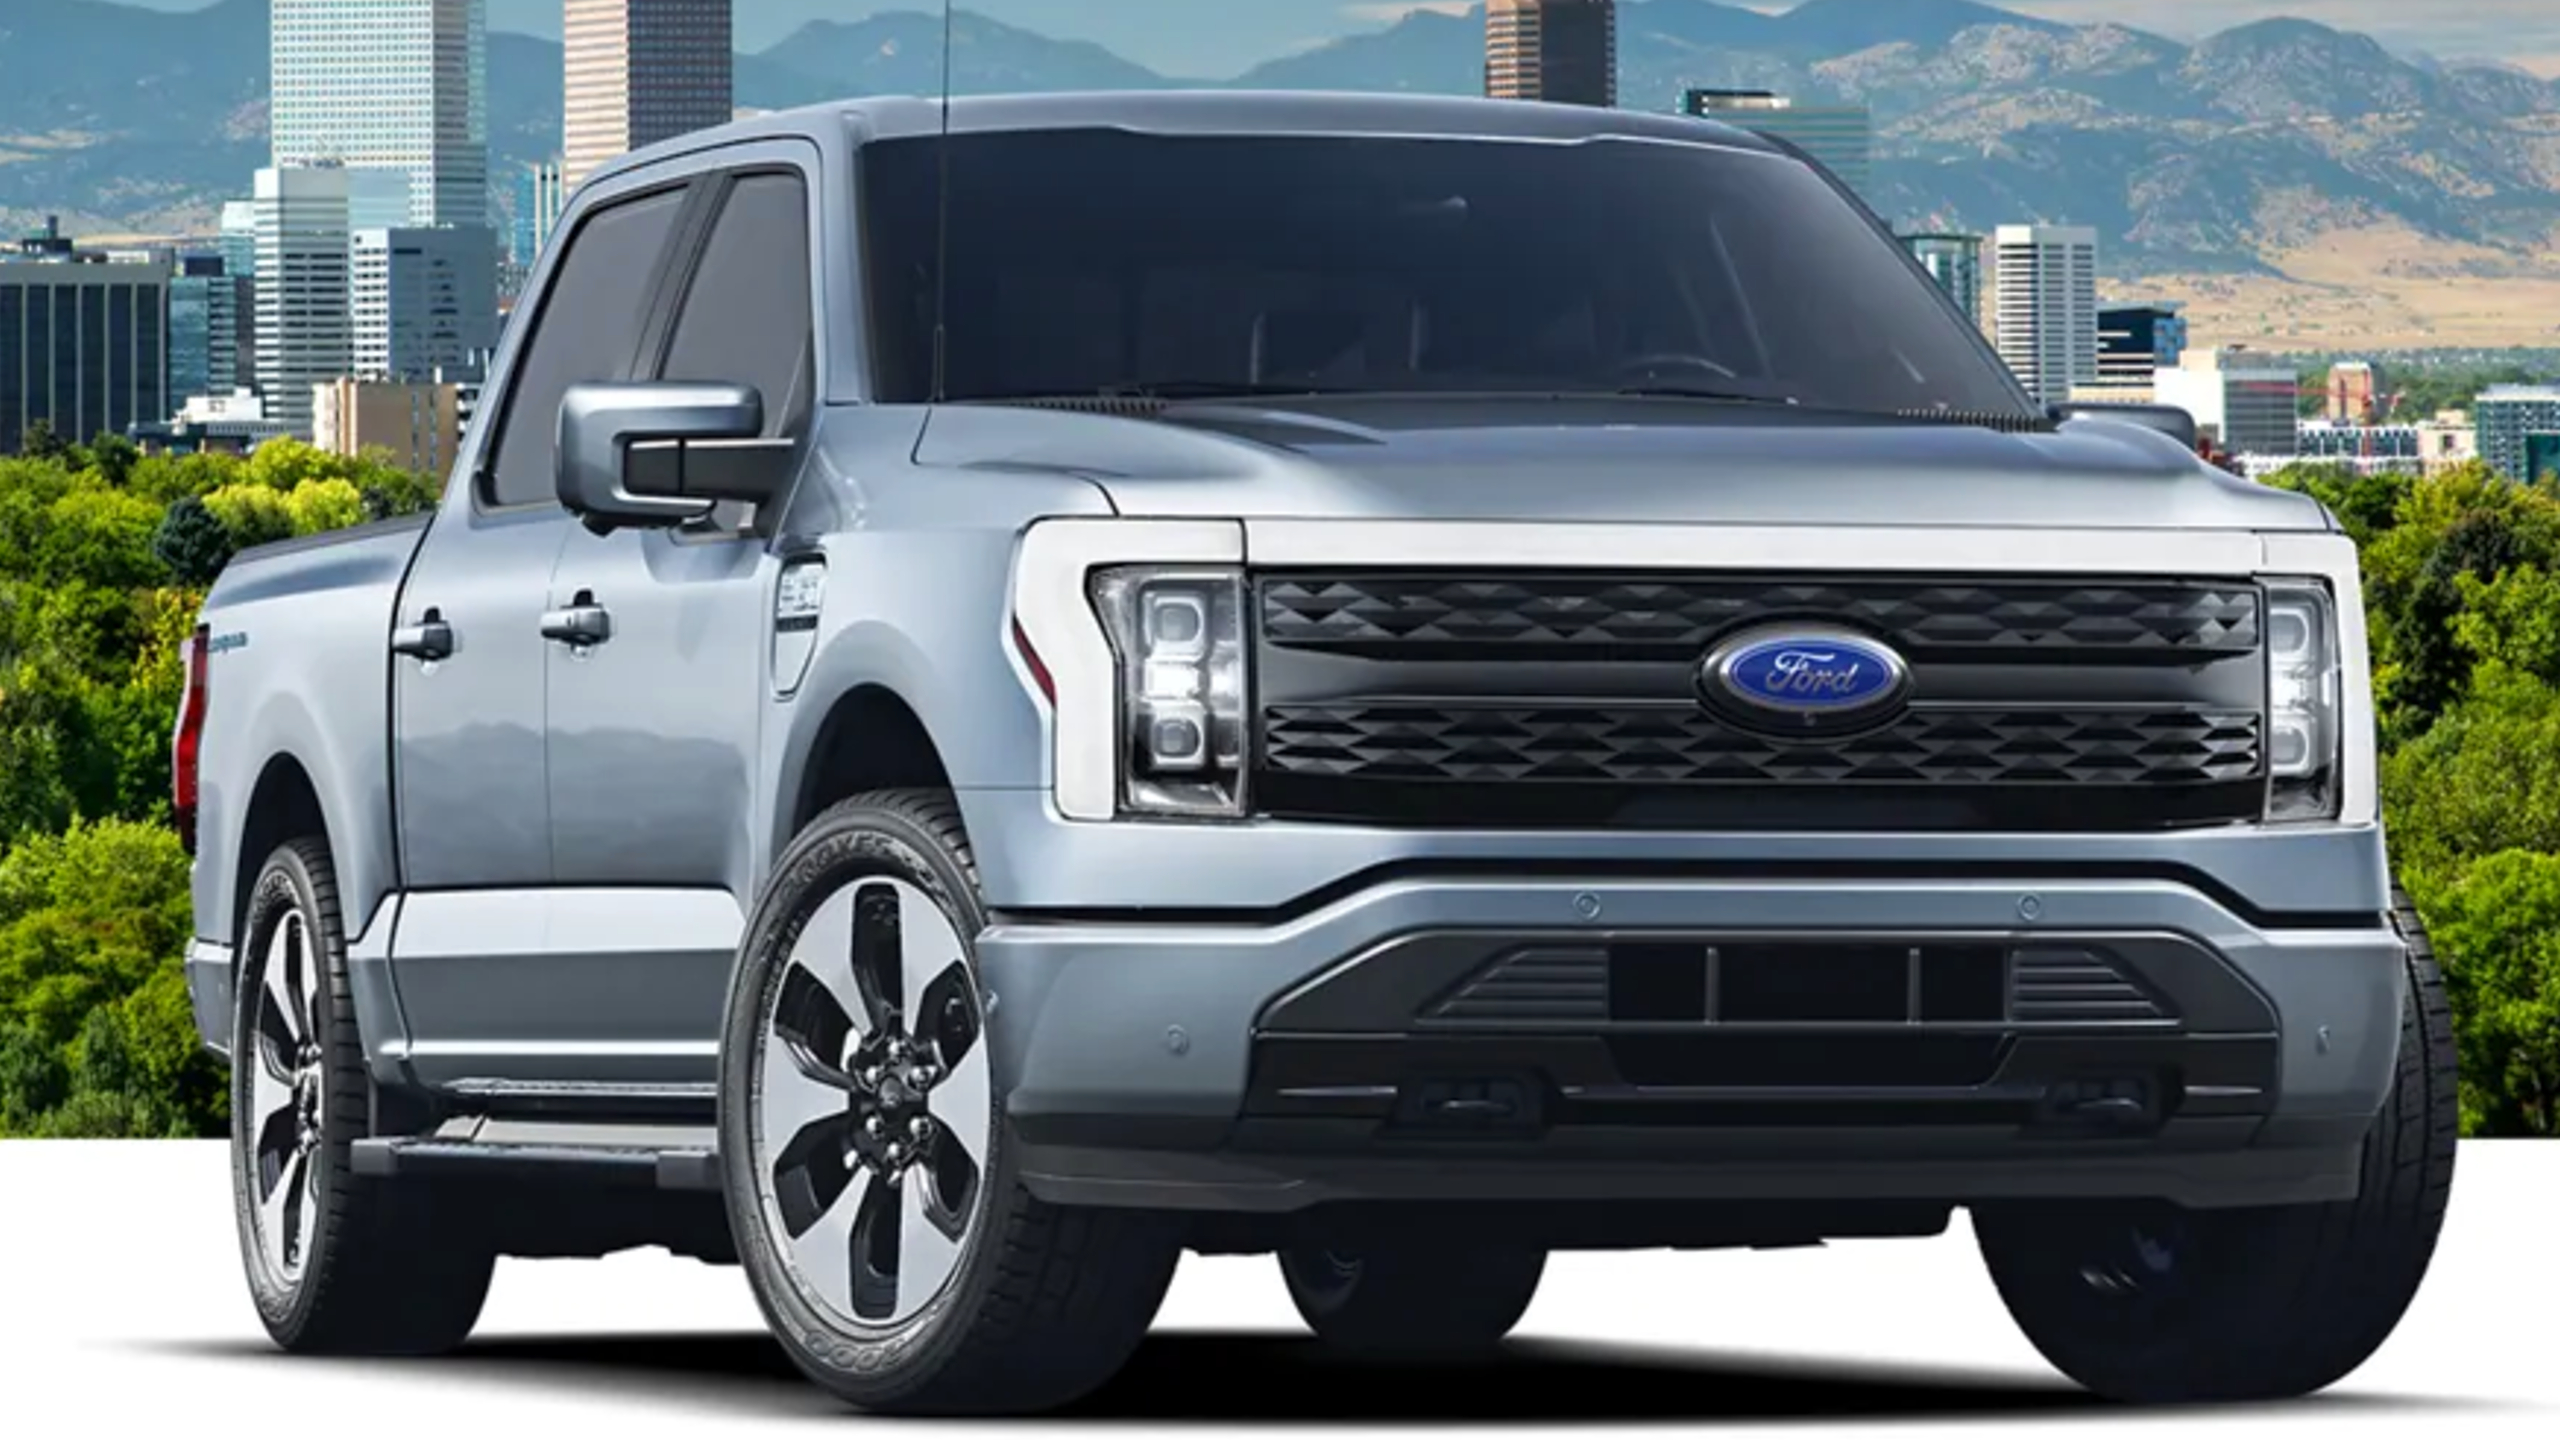 The 2022 Ford F-150 Lightning parked in front of buildings